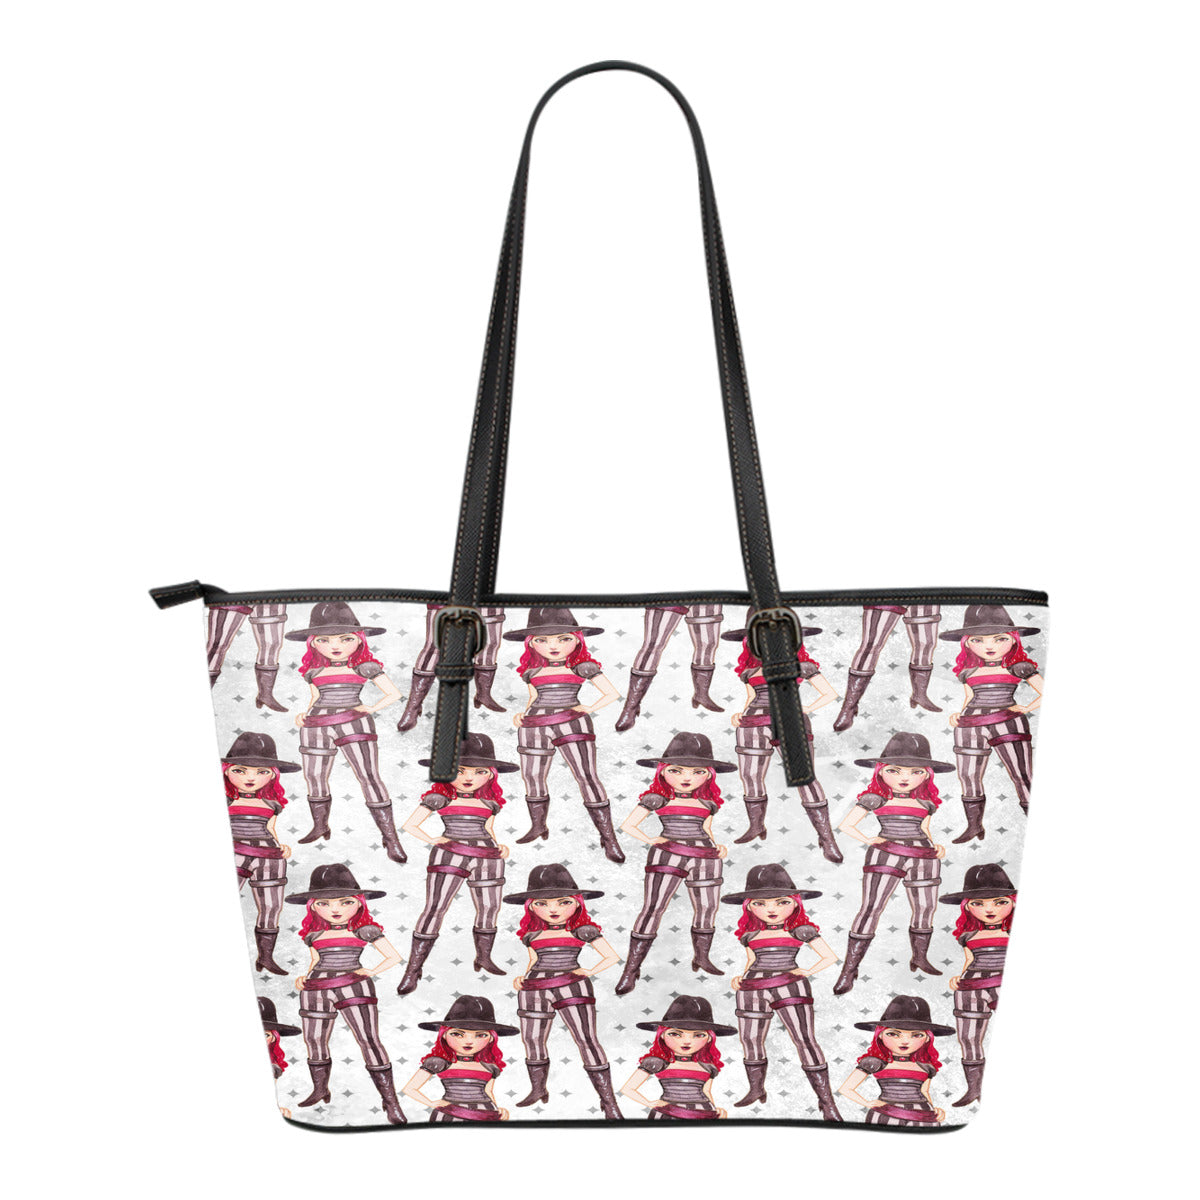 Vampire Themed Design C1 Women Small Leather Tote Bag